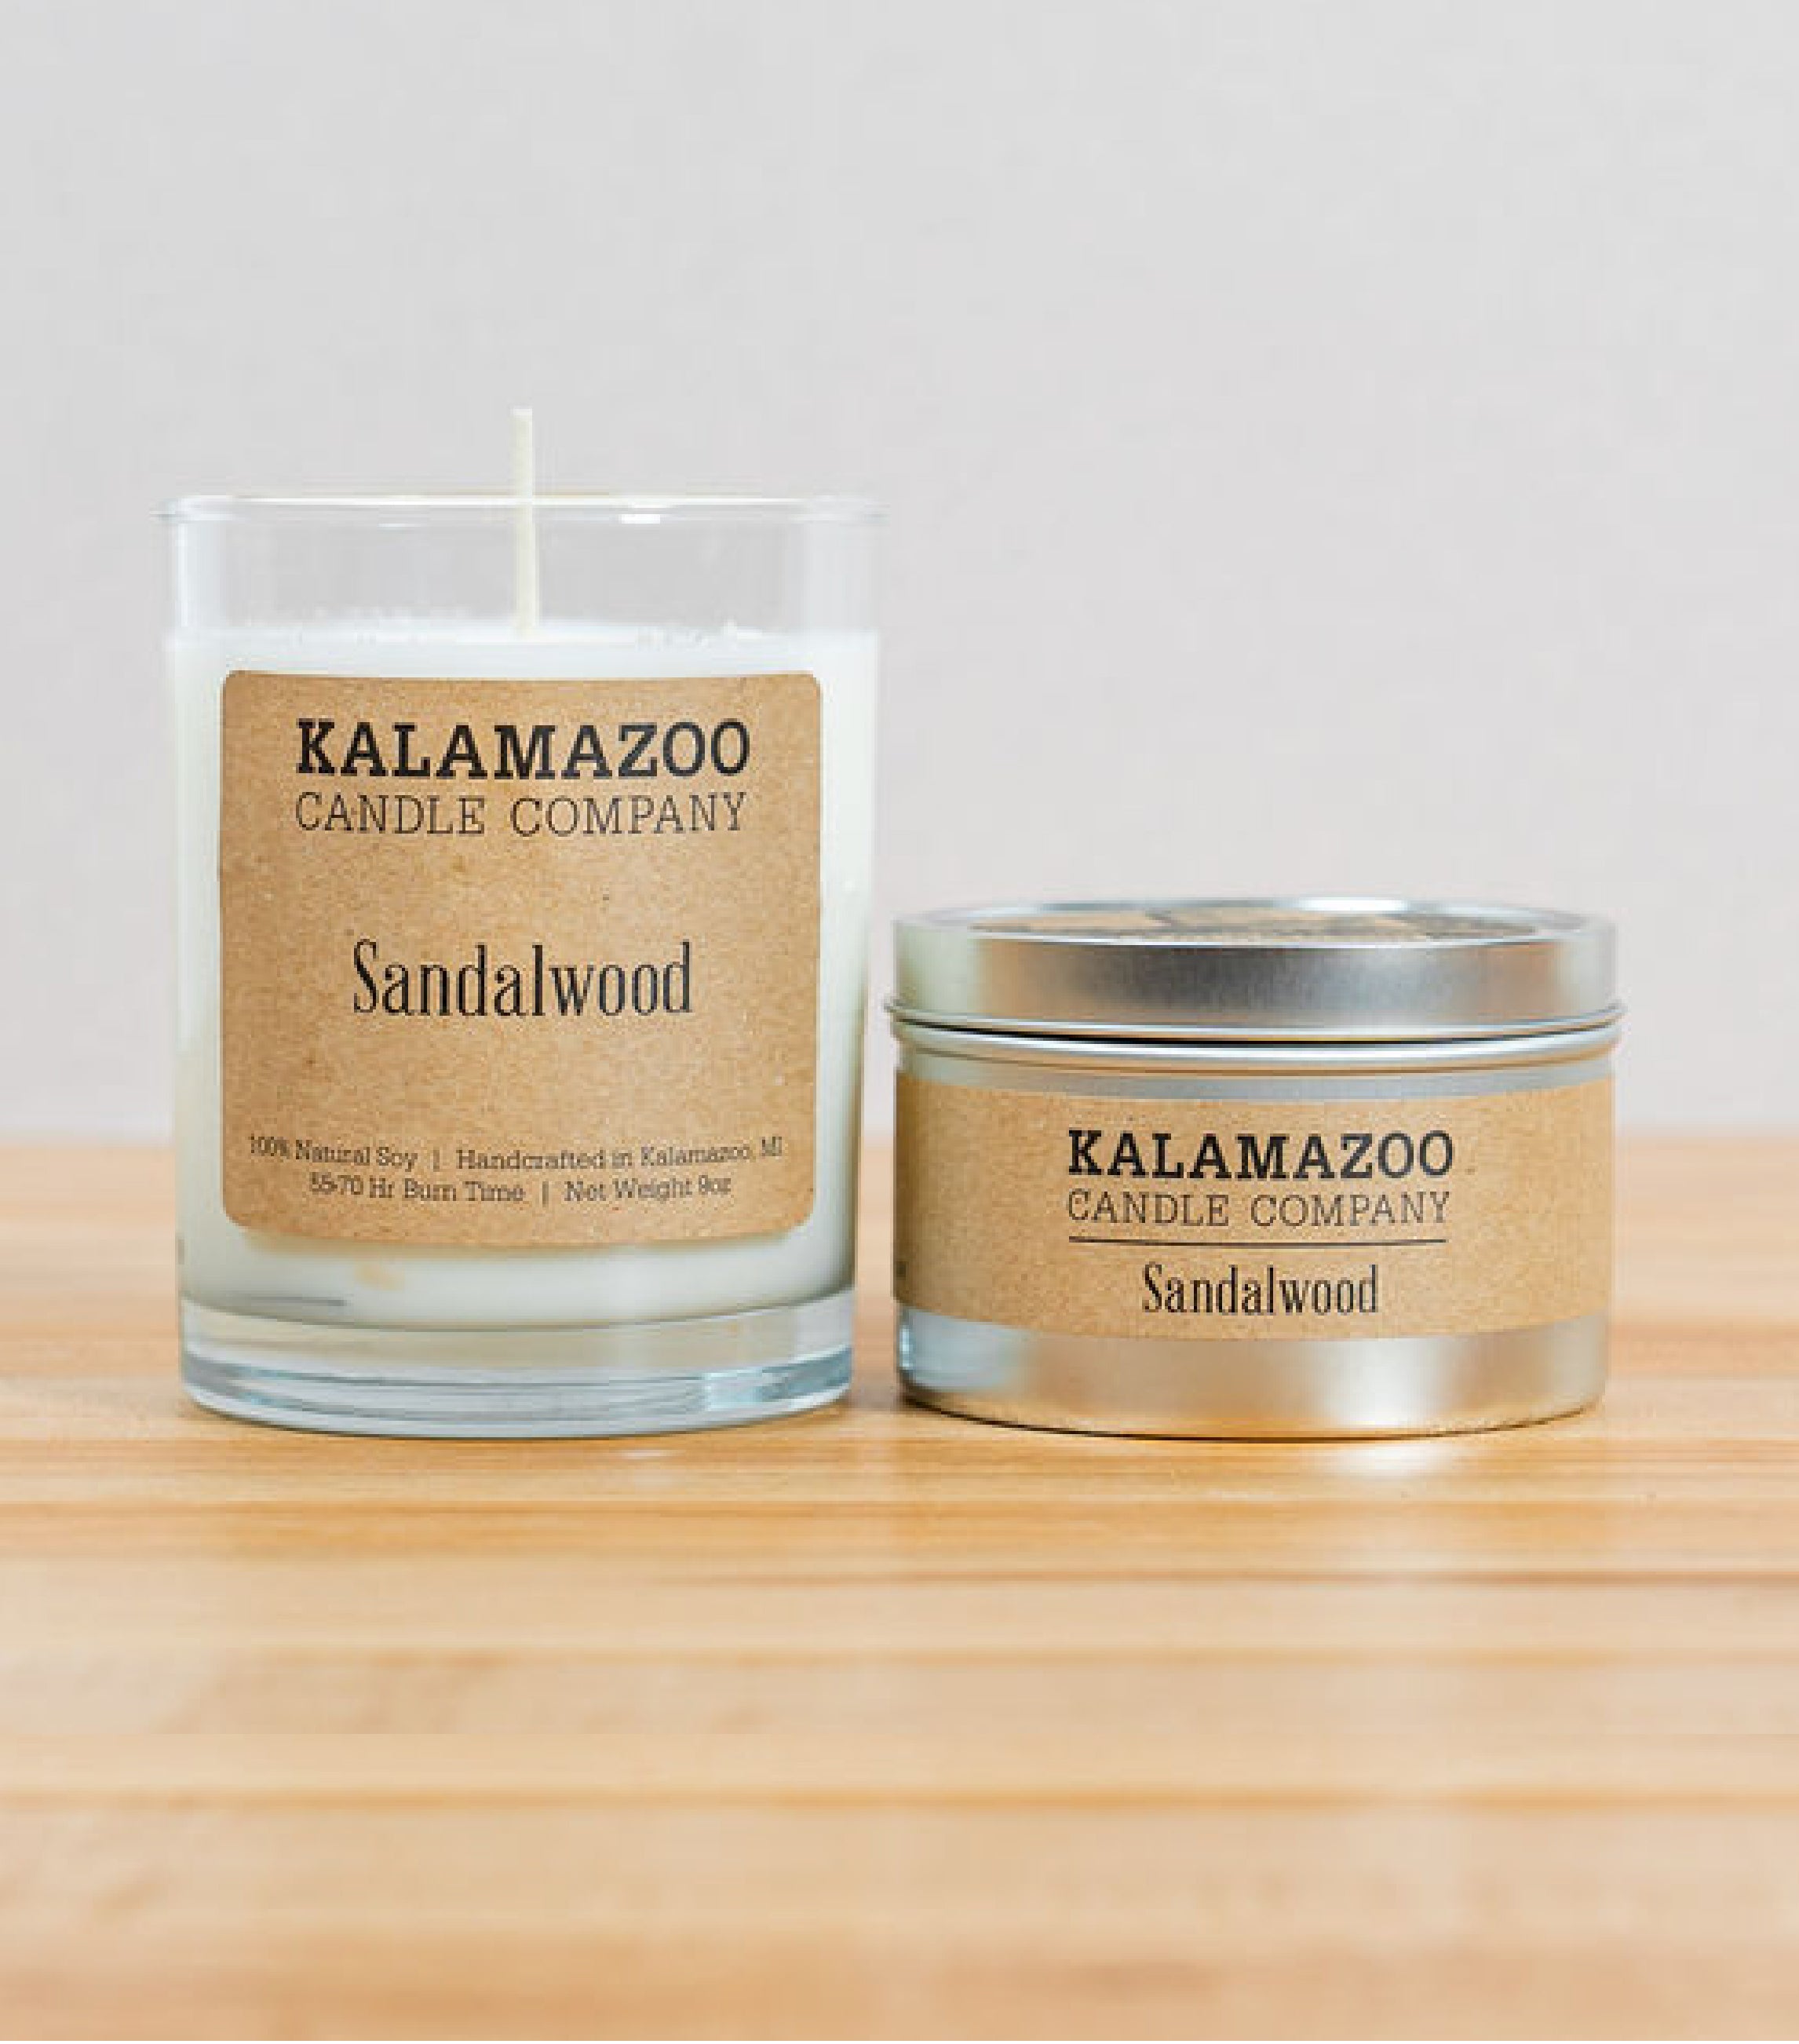 Sandalwood Candles This classic soy candle is an exotic and earthy blend of warm sandalwood, bergamot, and nutmeg. All Kalamazoo Candles are: 100% natural scented soy wax; produced using locally sourced and American-made materials; crafted from clean, high quality ingredients.